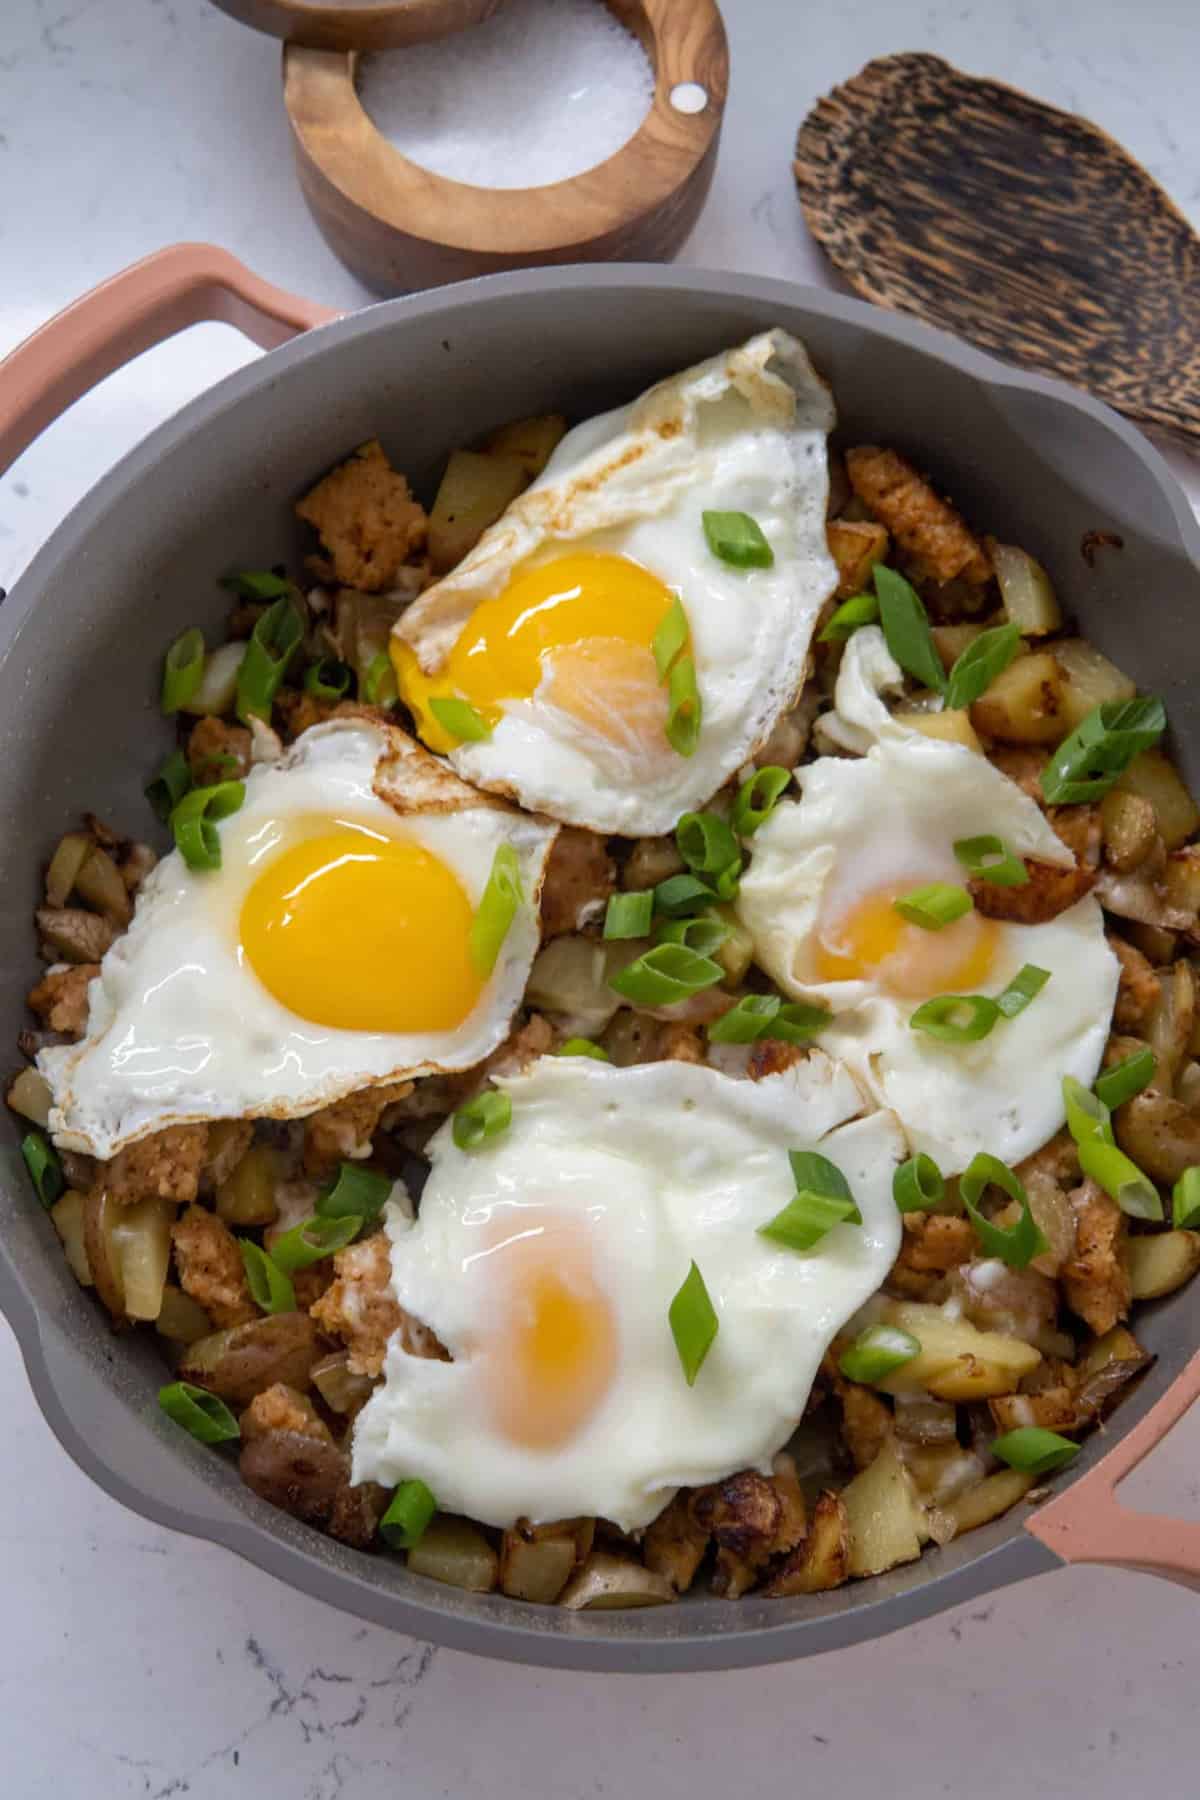 This crispy potato egg hash is made with butter oil, Yukon potatoes, breakfast sausage, eggs, scallions, and cooked to a nice crisp.